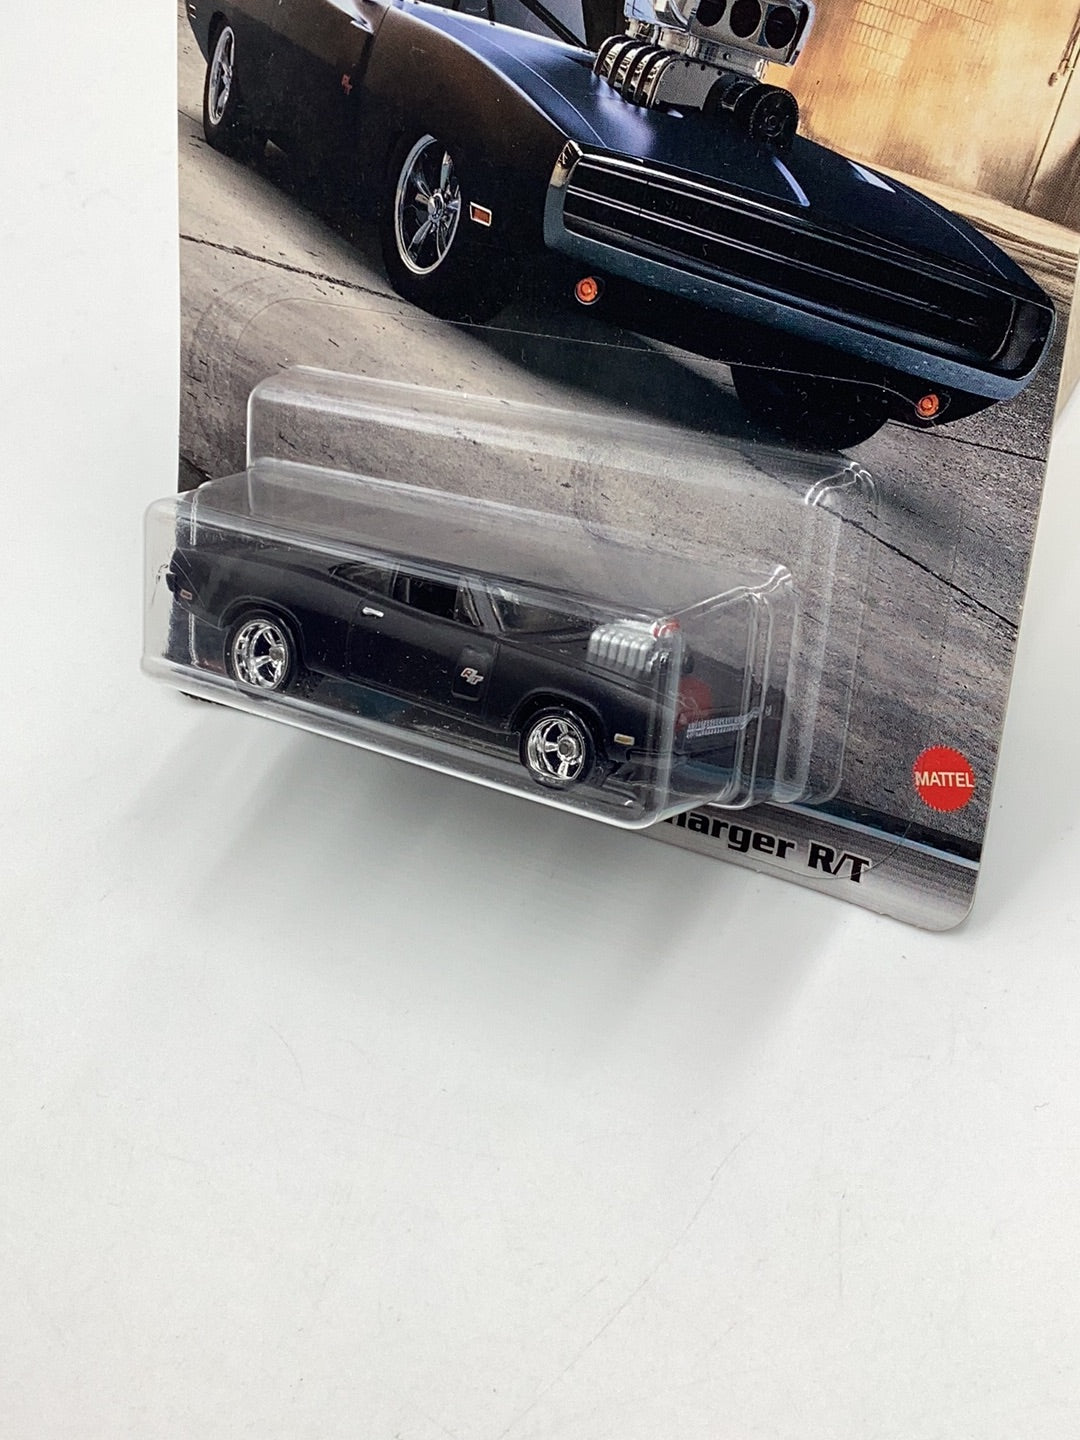 Hot Wheels Fast and Furious Full Force ‘70 Dodge Charger R/T 5/5 249E